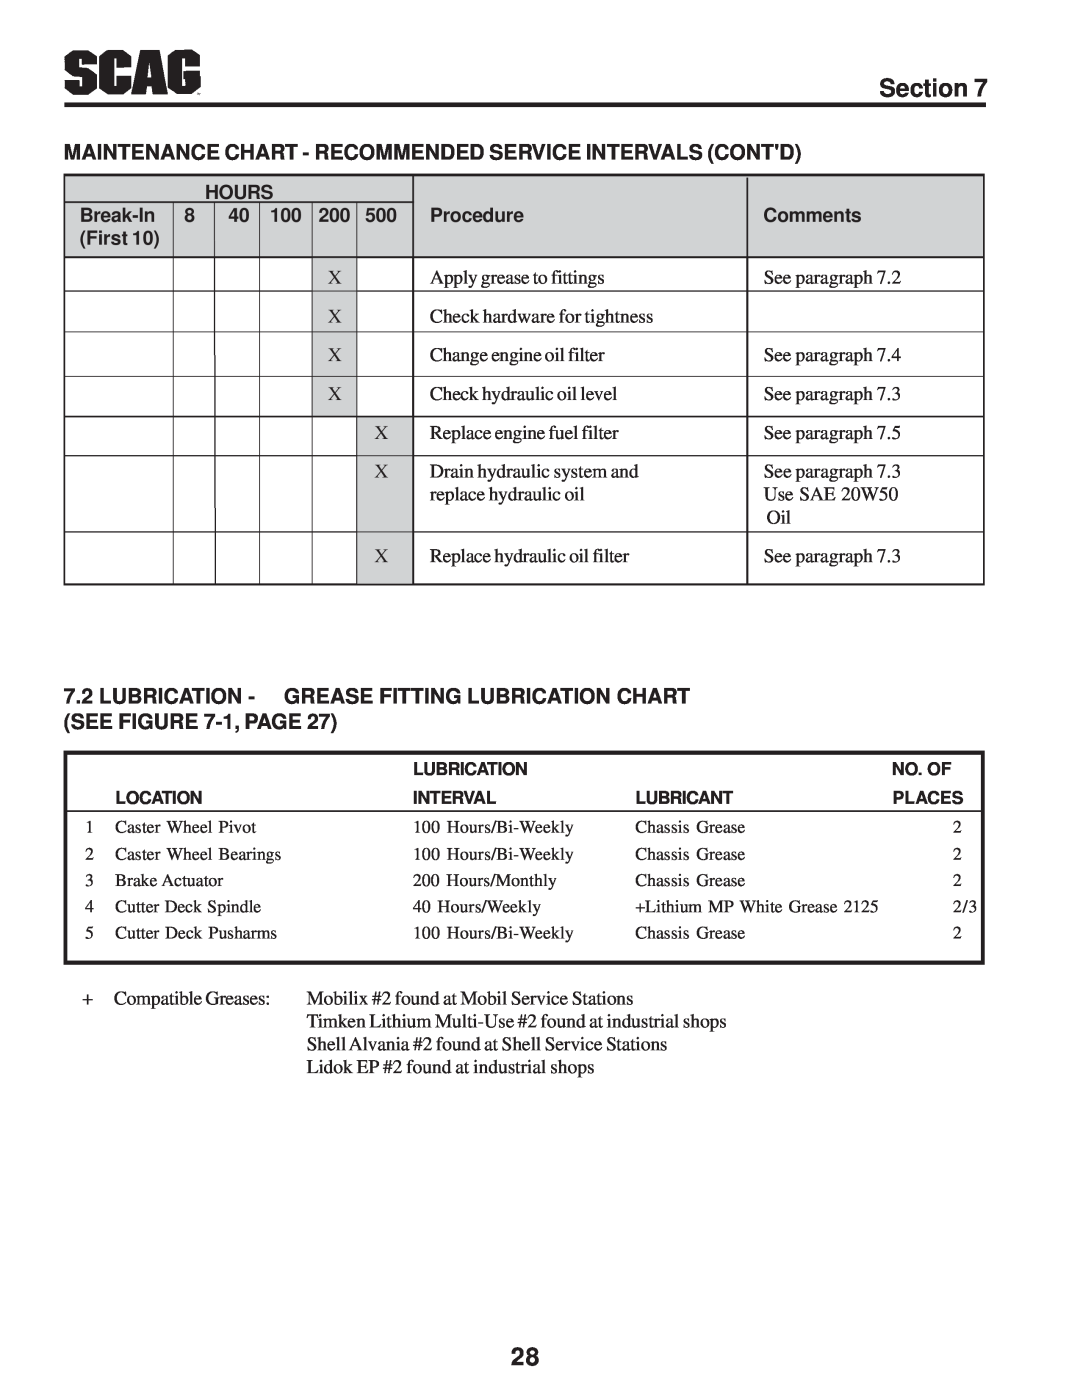 Scag Power Equipment SWZV manual Maintenance Chart - Recommended Service Intervals Contd 